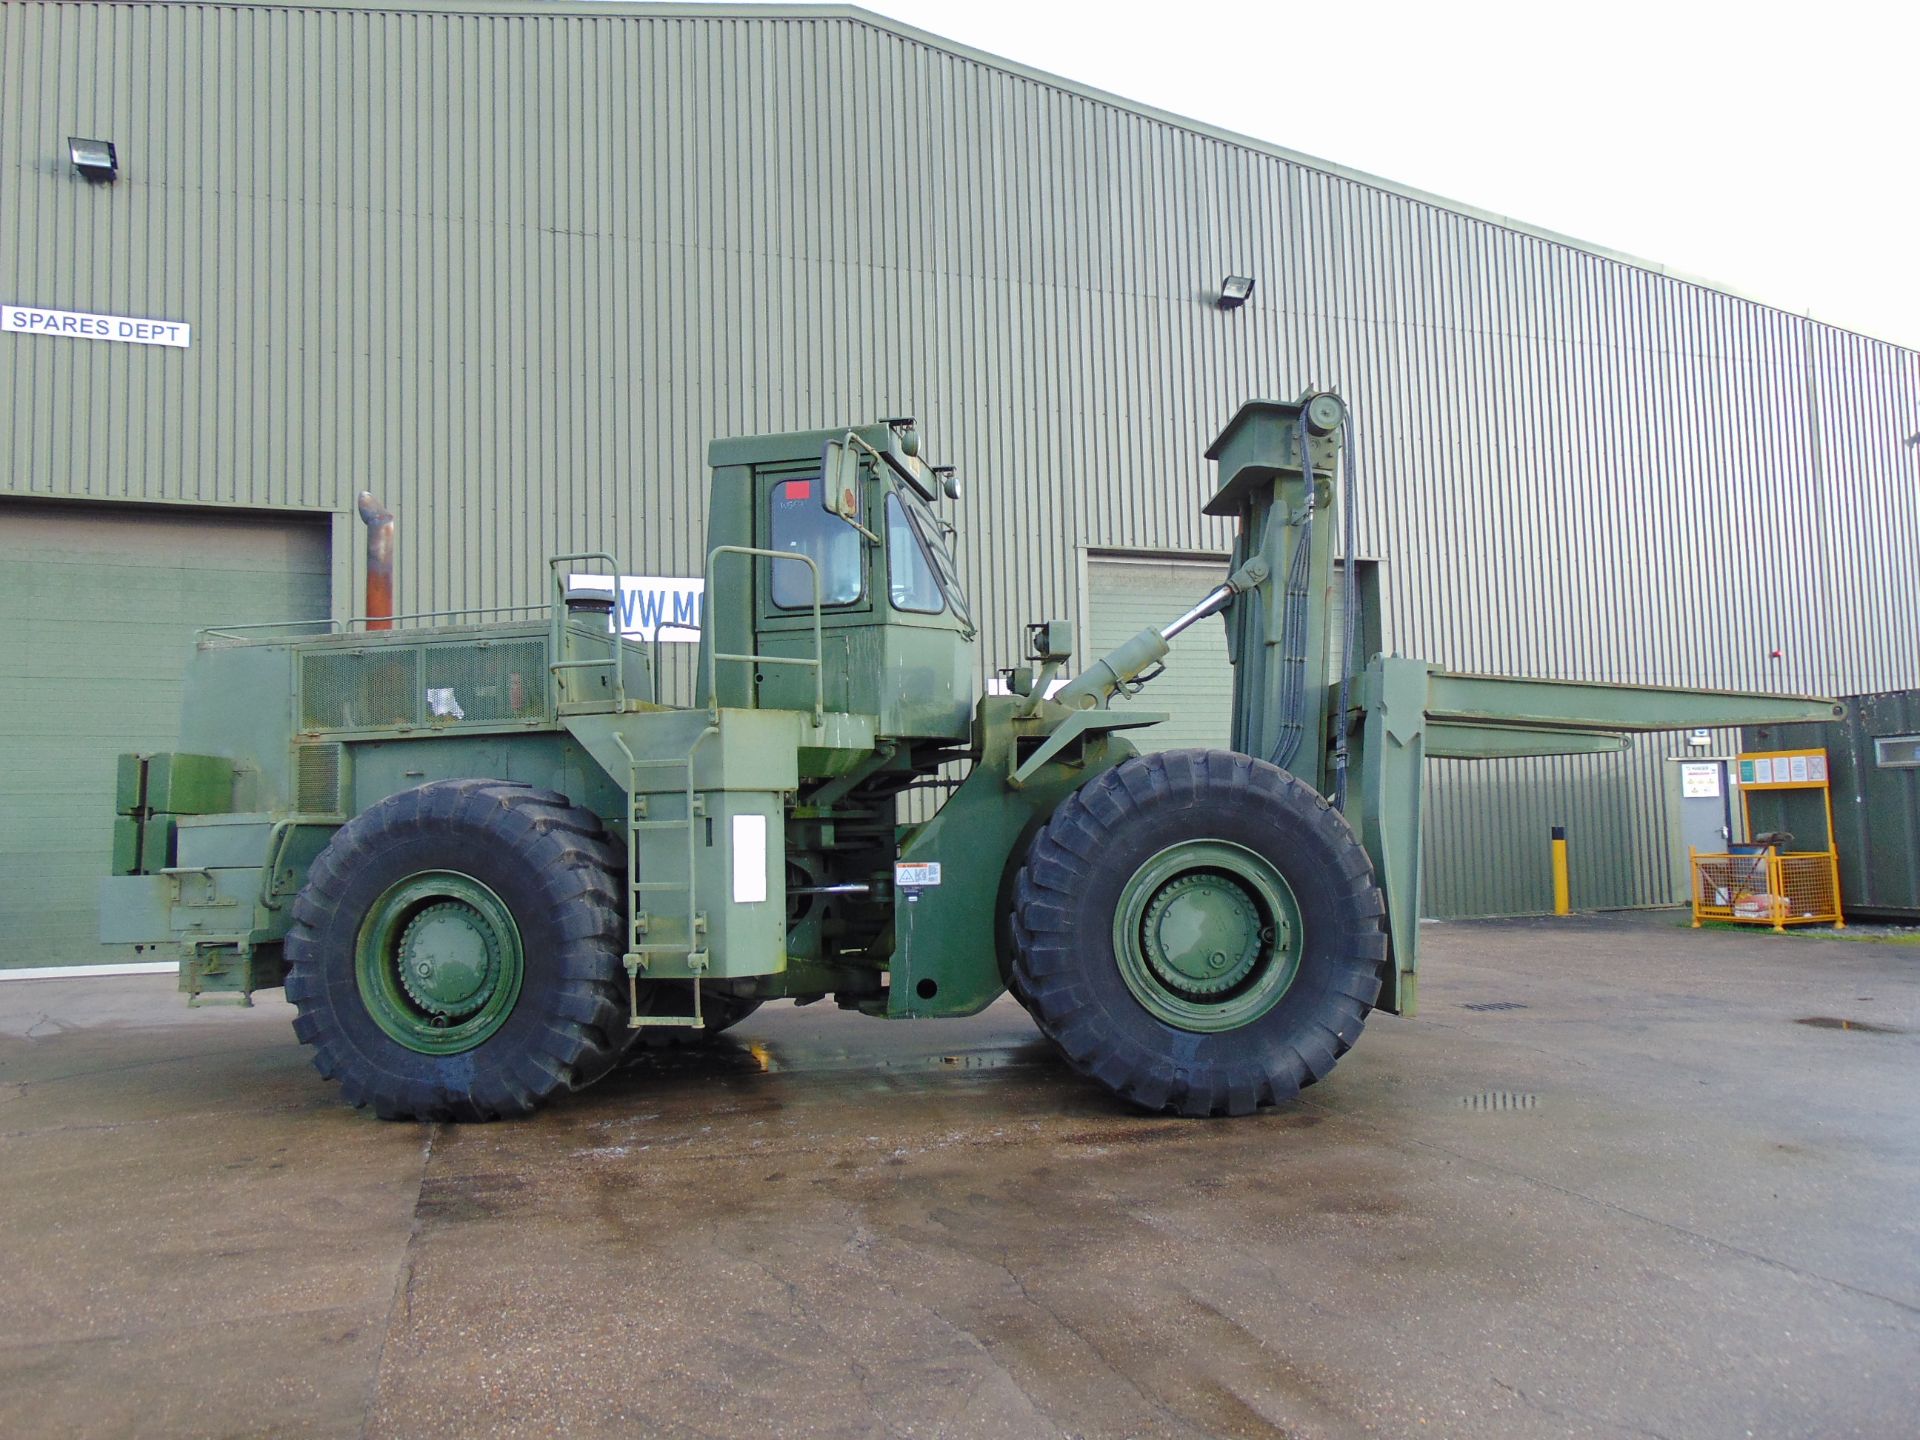 1983 Caterpillar 988B/DV43 50,000lb Rough Terrain Container Handler Forklift ONLY 714 HOURS! - Image 2 of 32